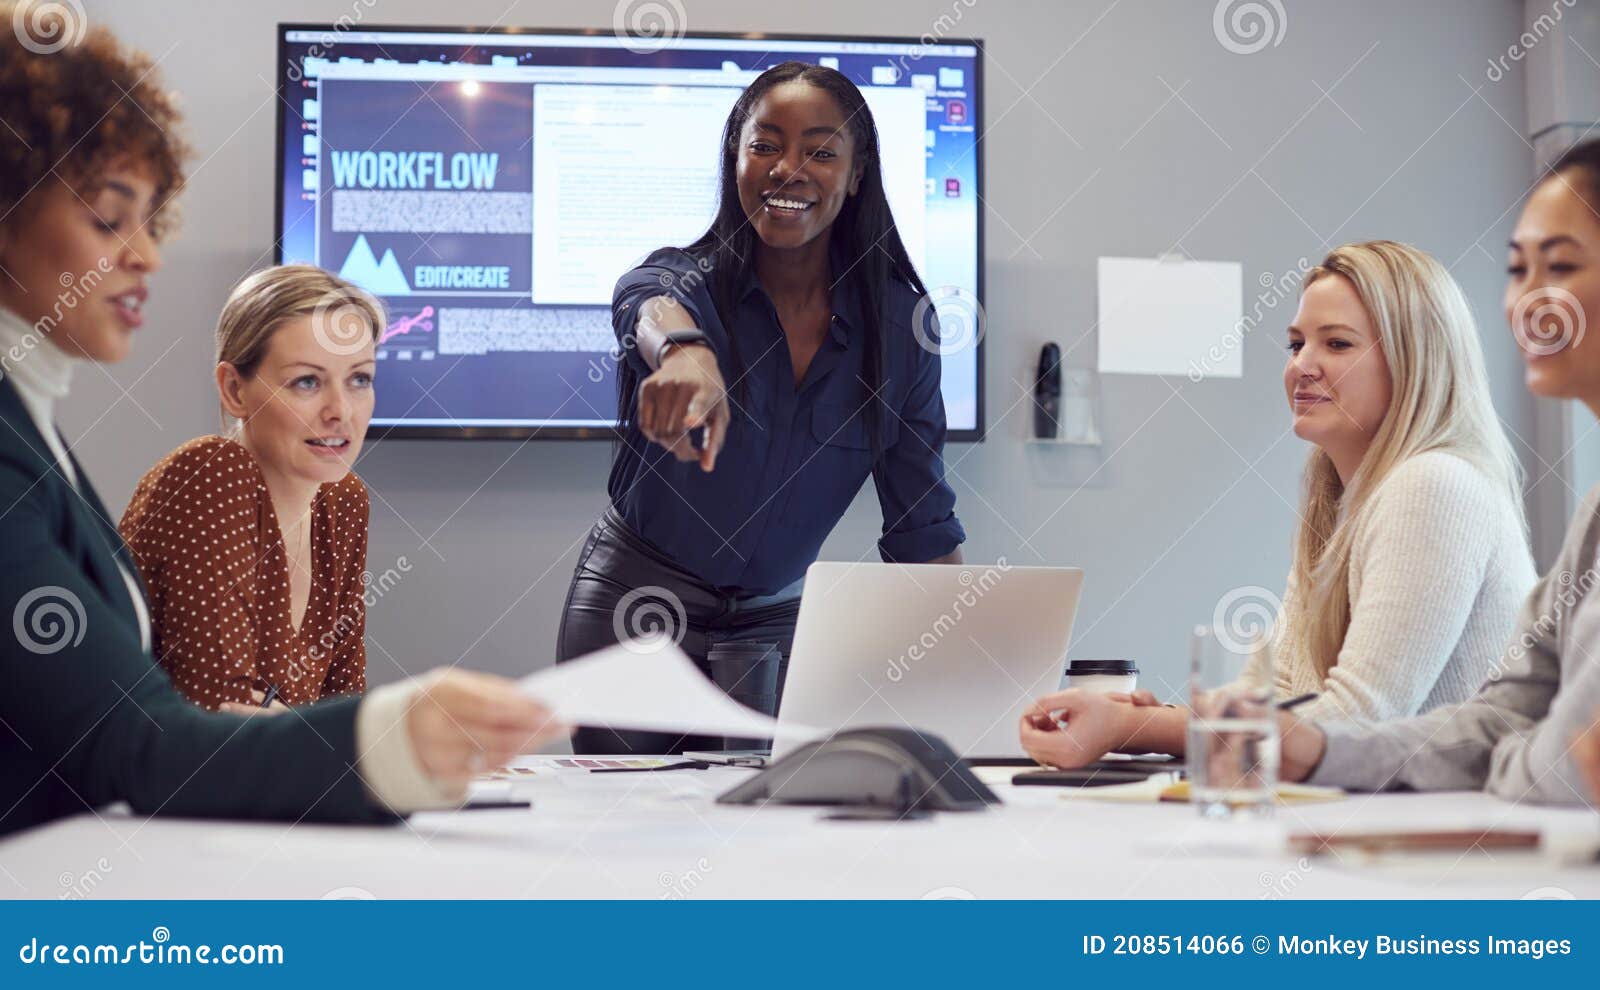 young businesswoman leading creative meeting of women collaborating around table in modern office